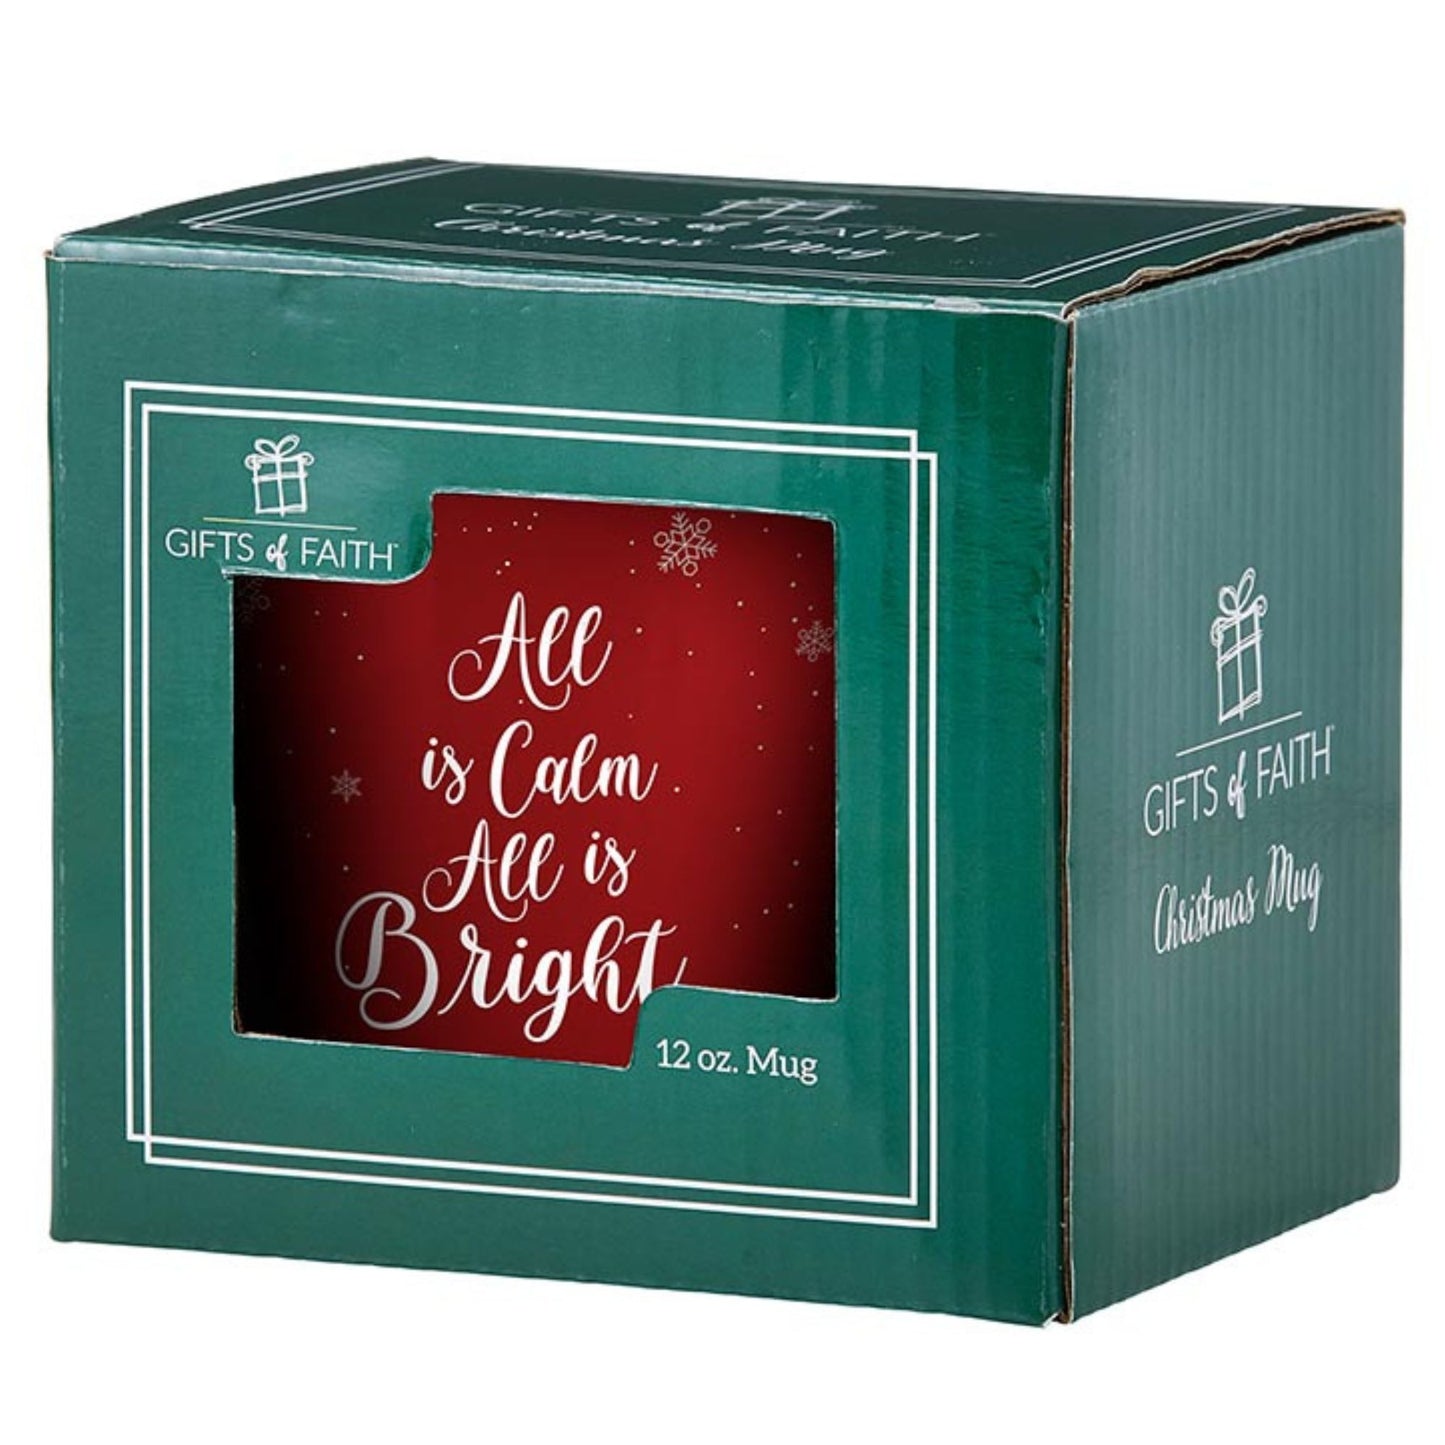 All is Calm All is Bright - Red Christmas Mug - Christian Drinkware shown in gift box | oak7west.com